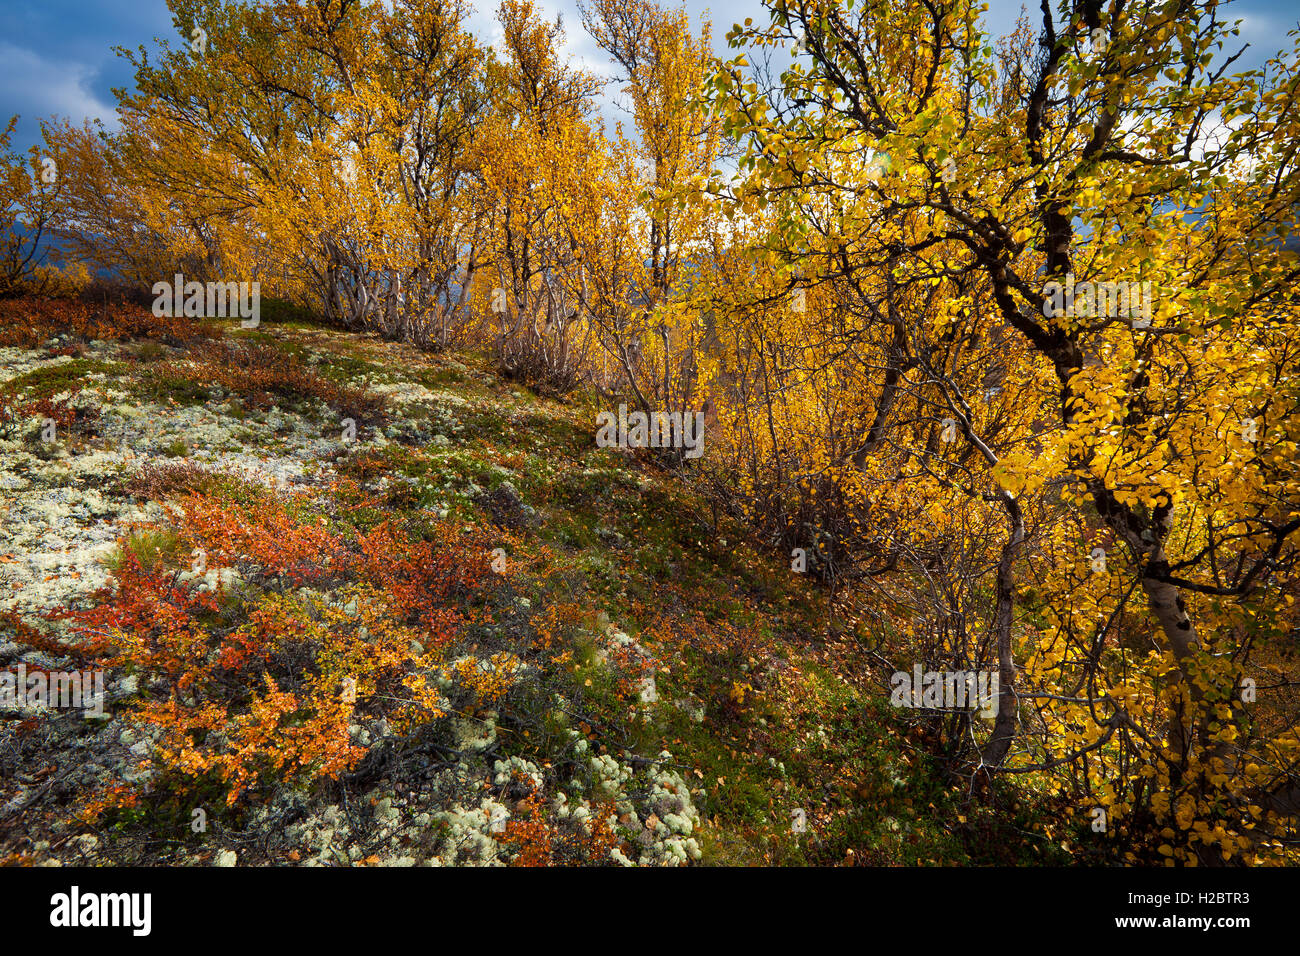 Birch trees in autumn colors in Dovrefjell national park, Norway. Stock Photo